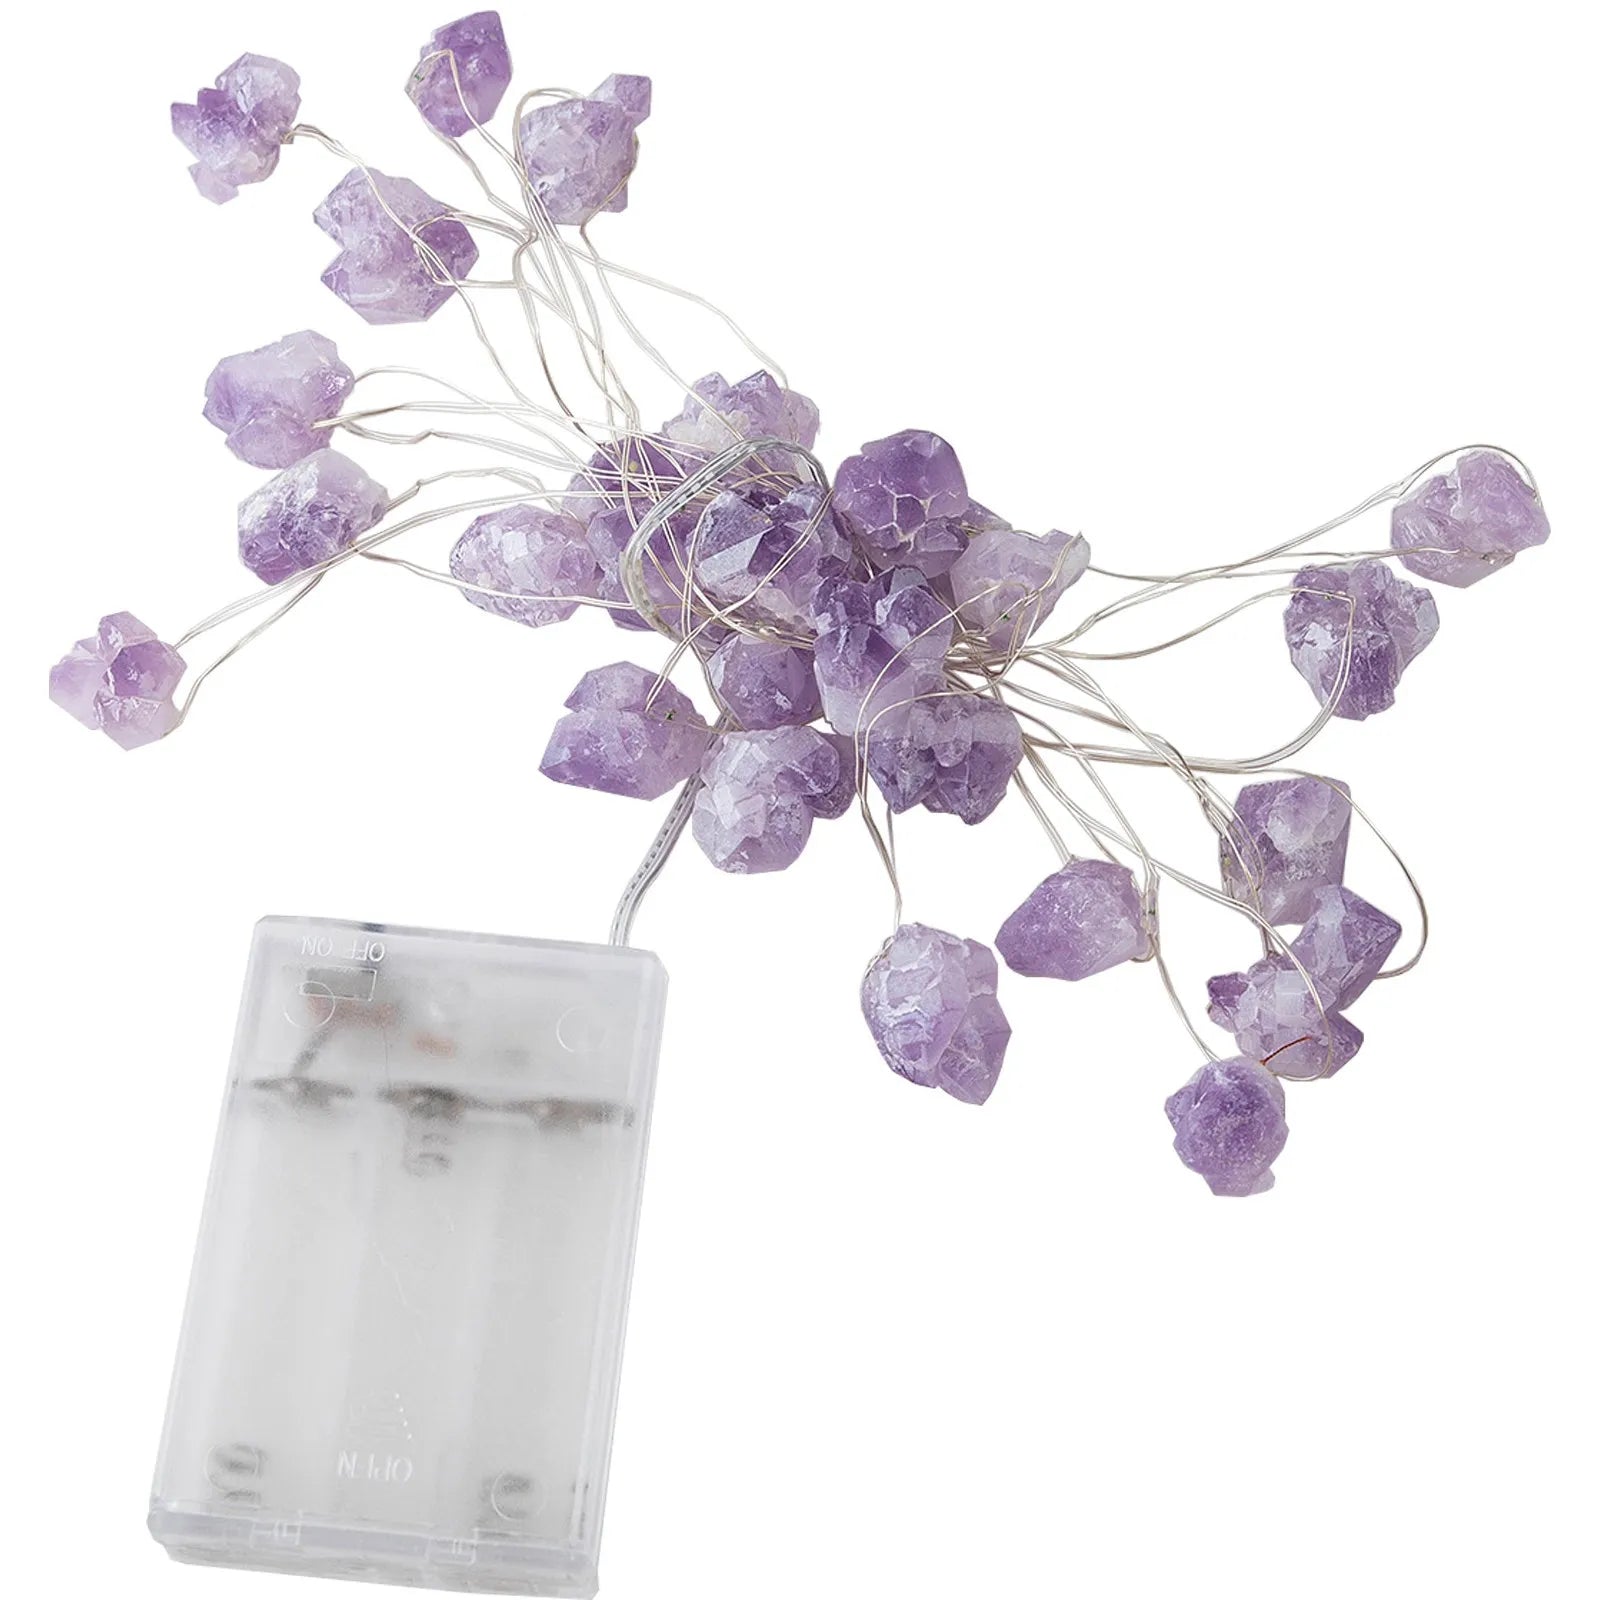 Natural Amethyst Crystal Decorative Fairy Lights - Battery Powered - Conscious Shopping